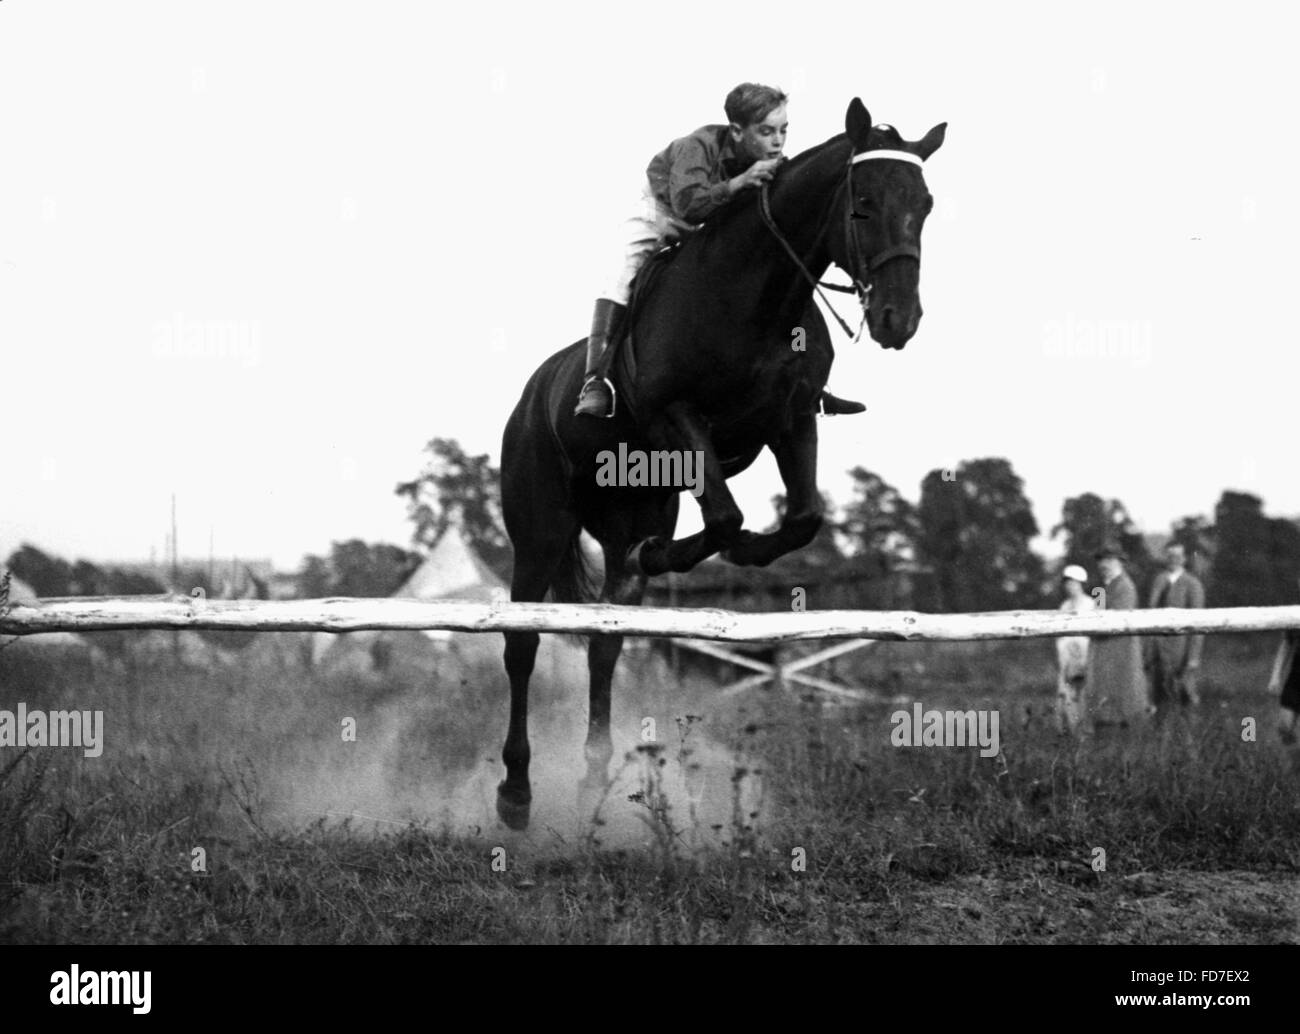 Pimpf with horse jumps over a hurdle, 1933 Stock Photo